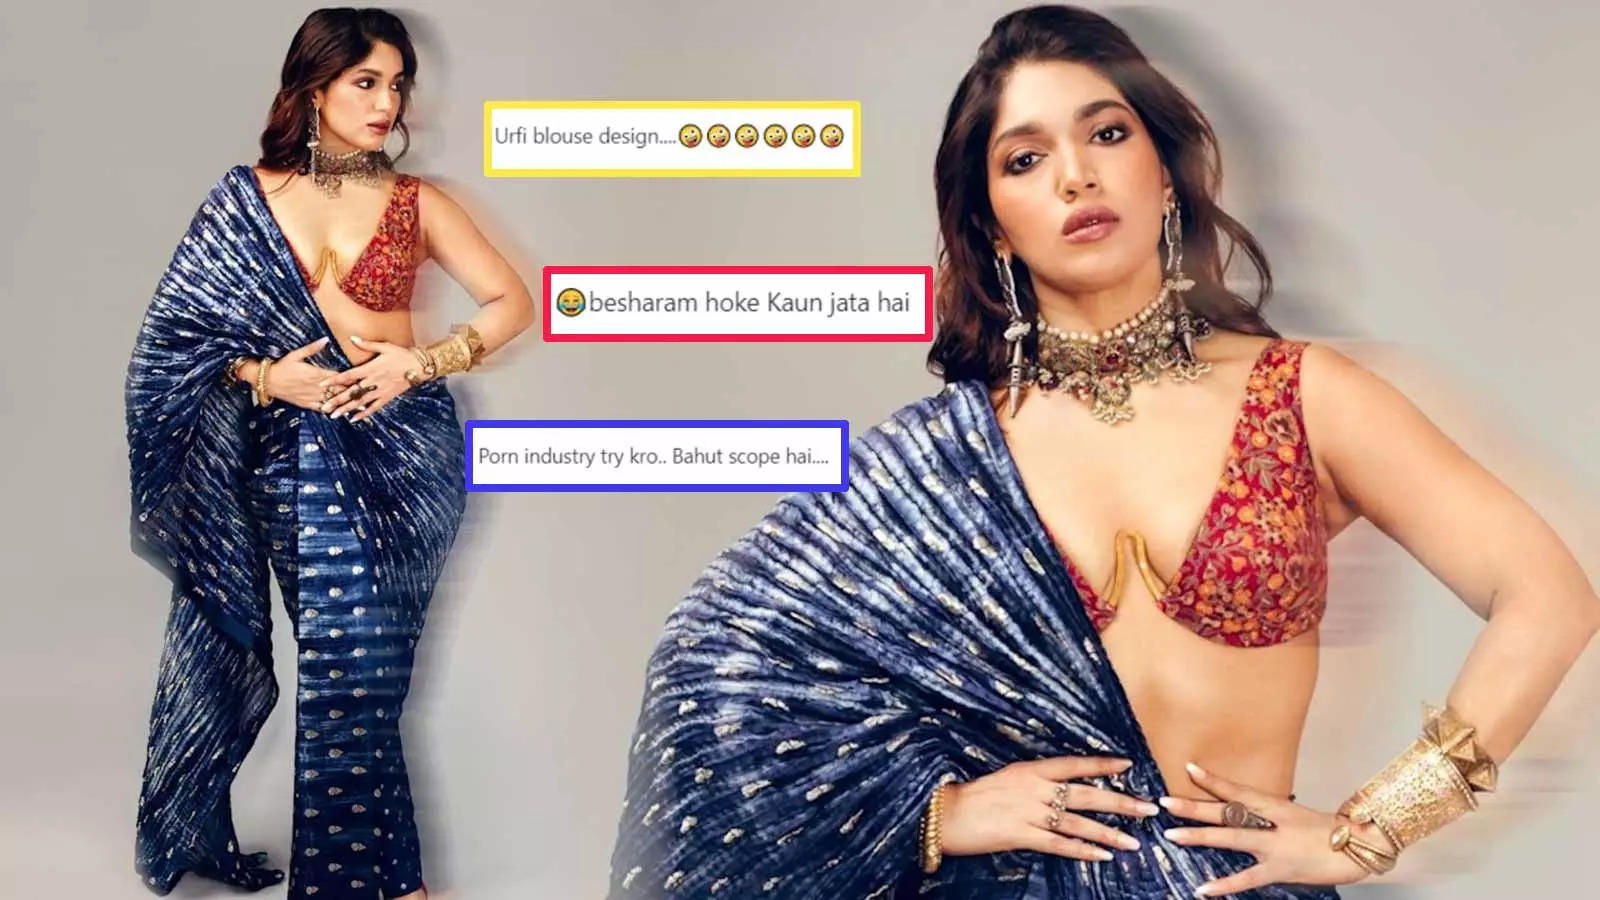 Shahrukh Khan Bf Xx - Porn industry try kro': Bhumi Pednekar's look in a revealing bralette  blouse and saree gets TROLLED | Hindi Movie News - Bollywood - Times of  India